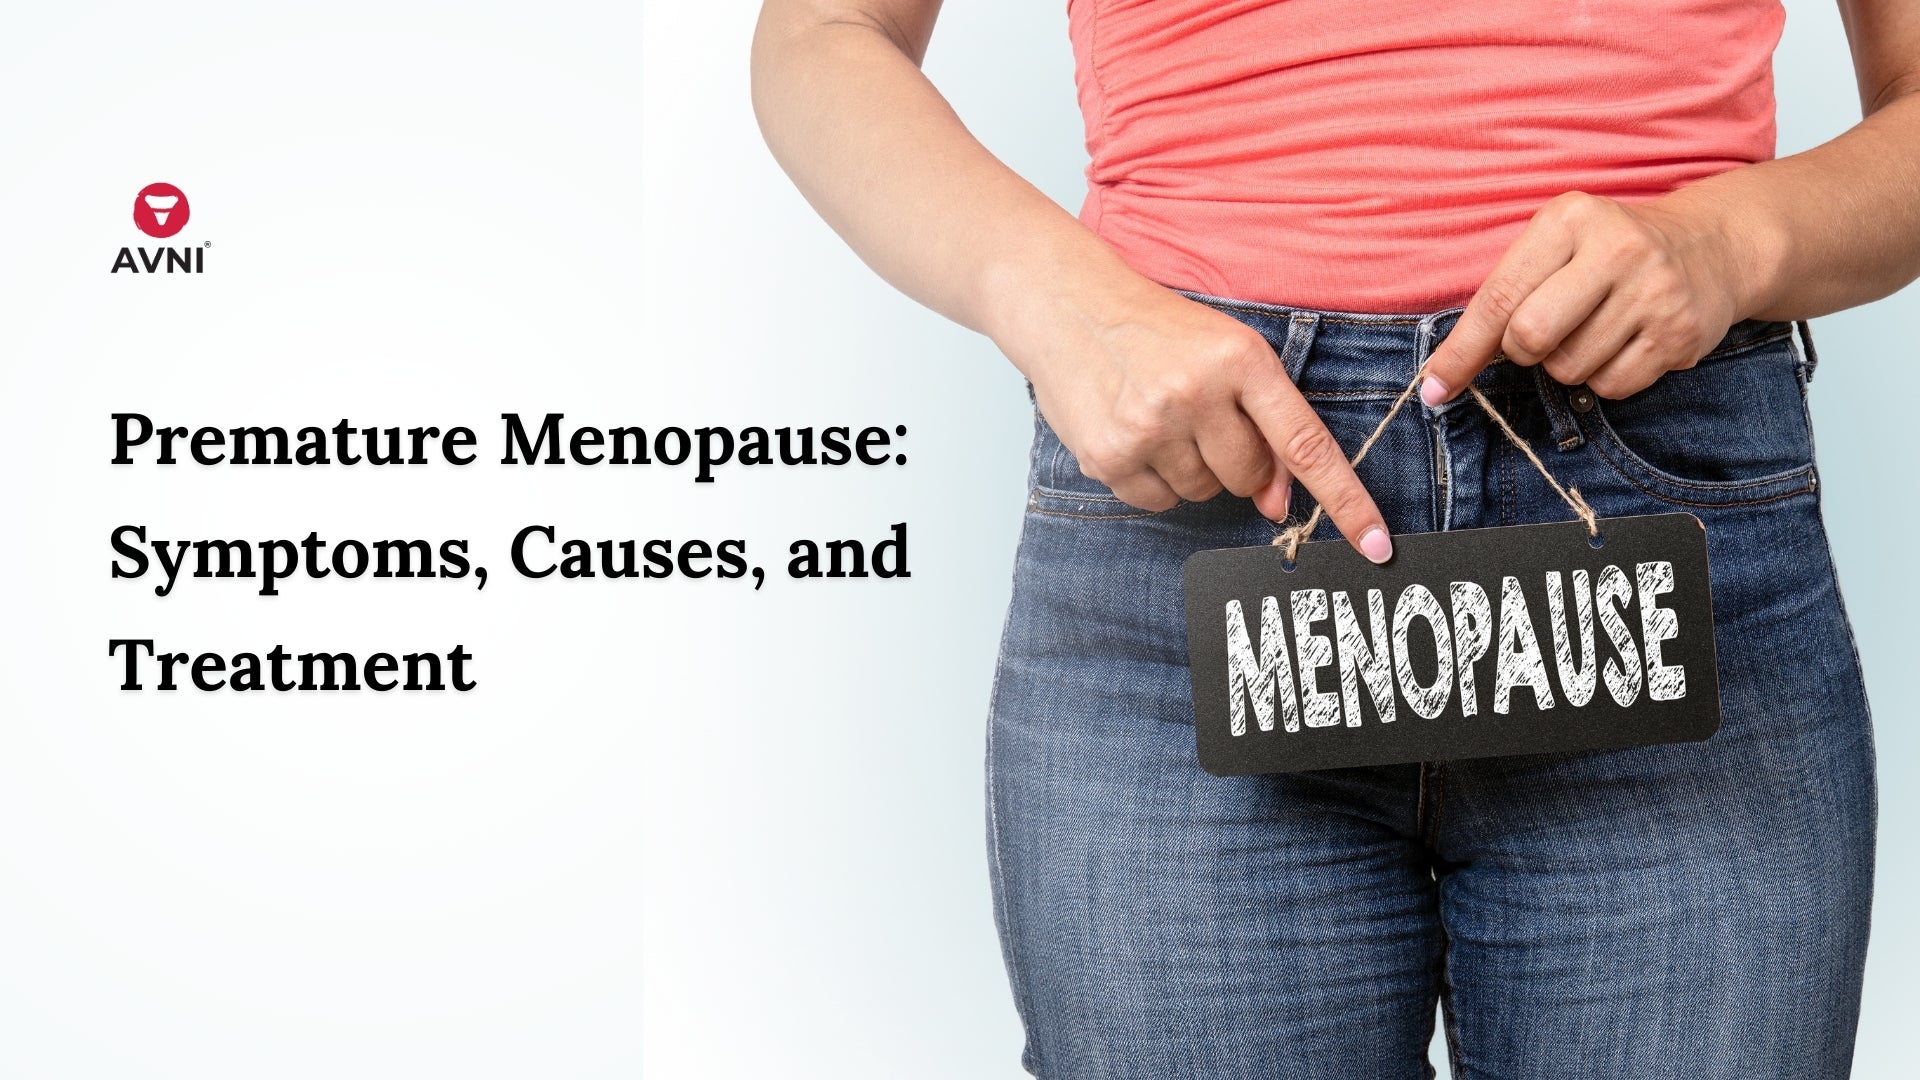 Premature Menopause: Symptoms, Causes, and Treatments